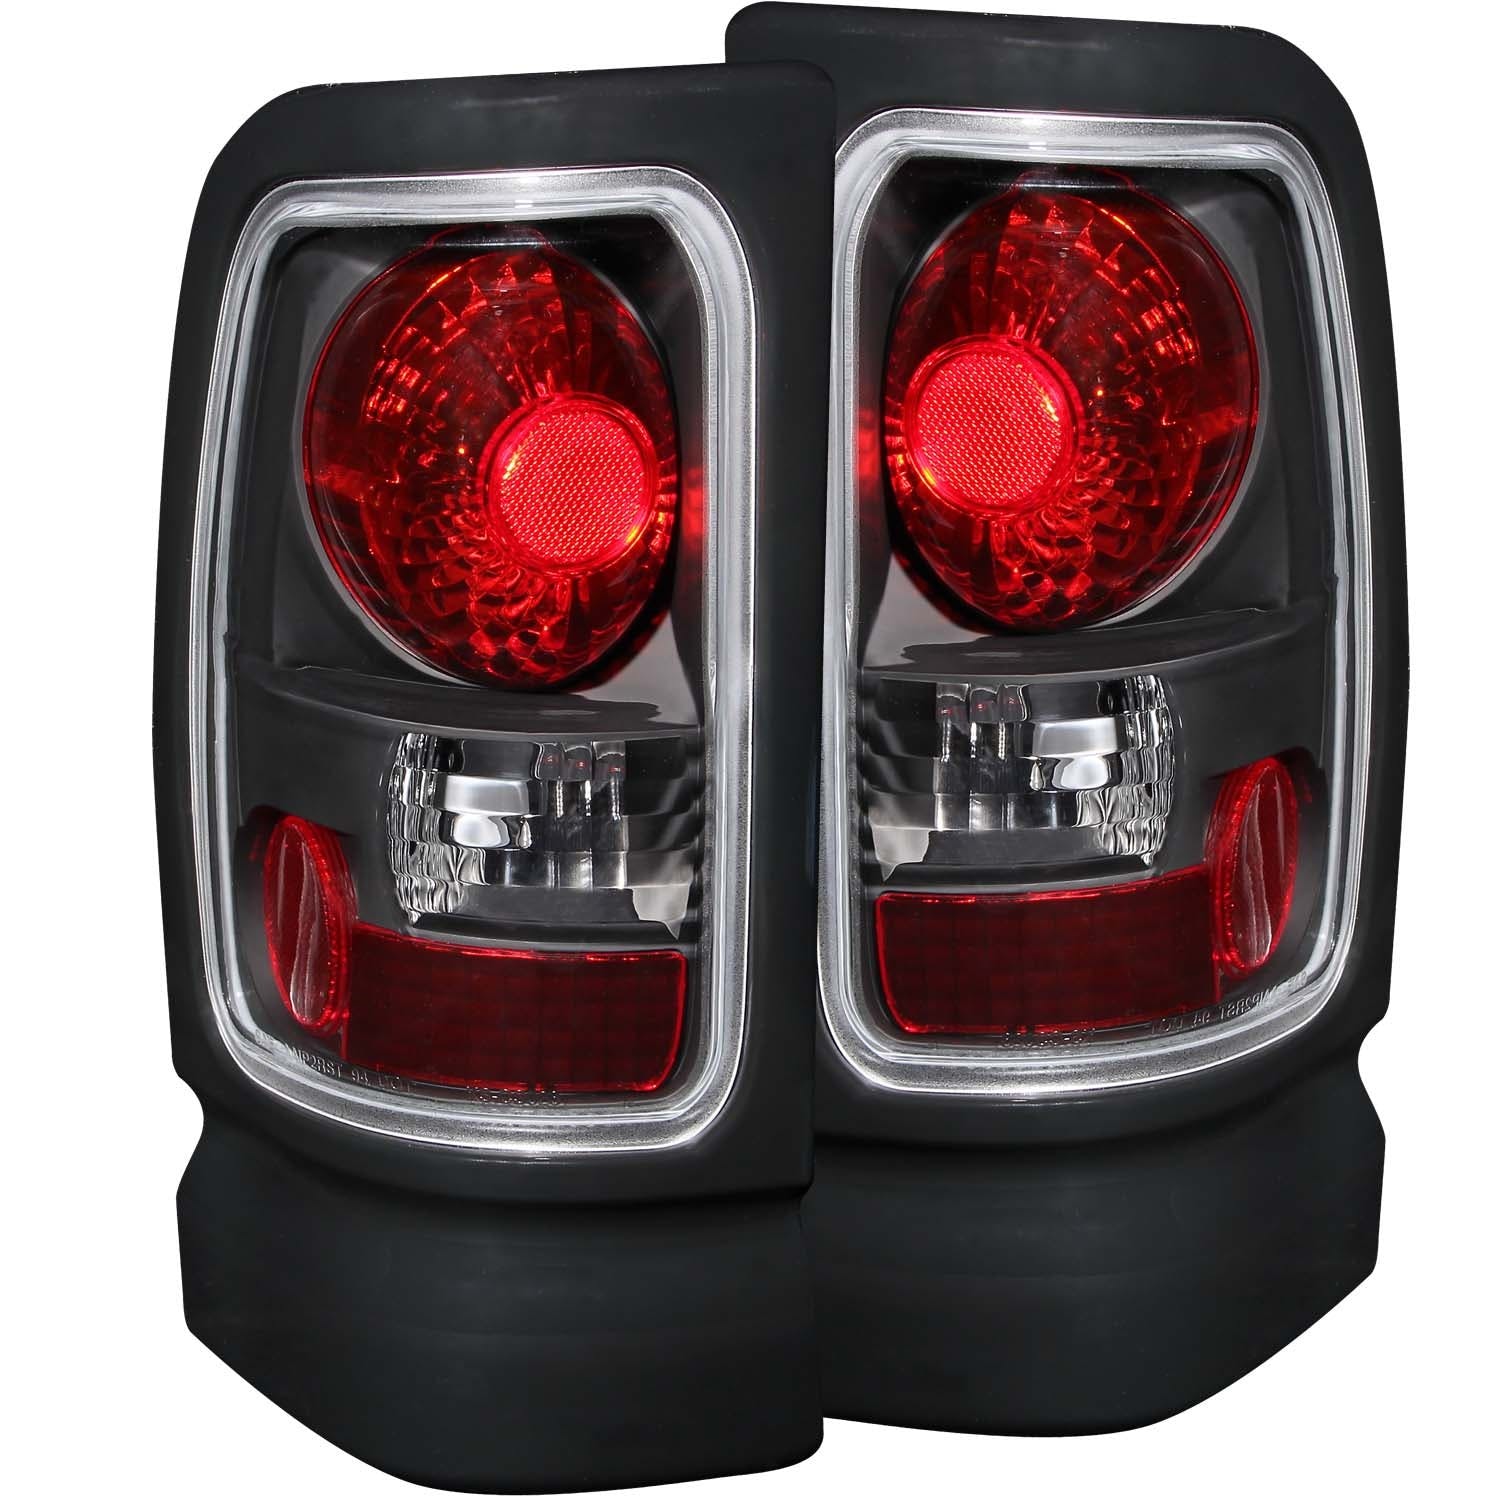 AnzoUSA 211048 Taillights Black